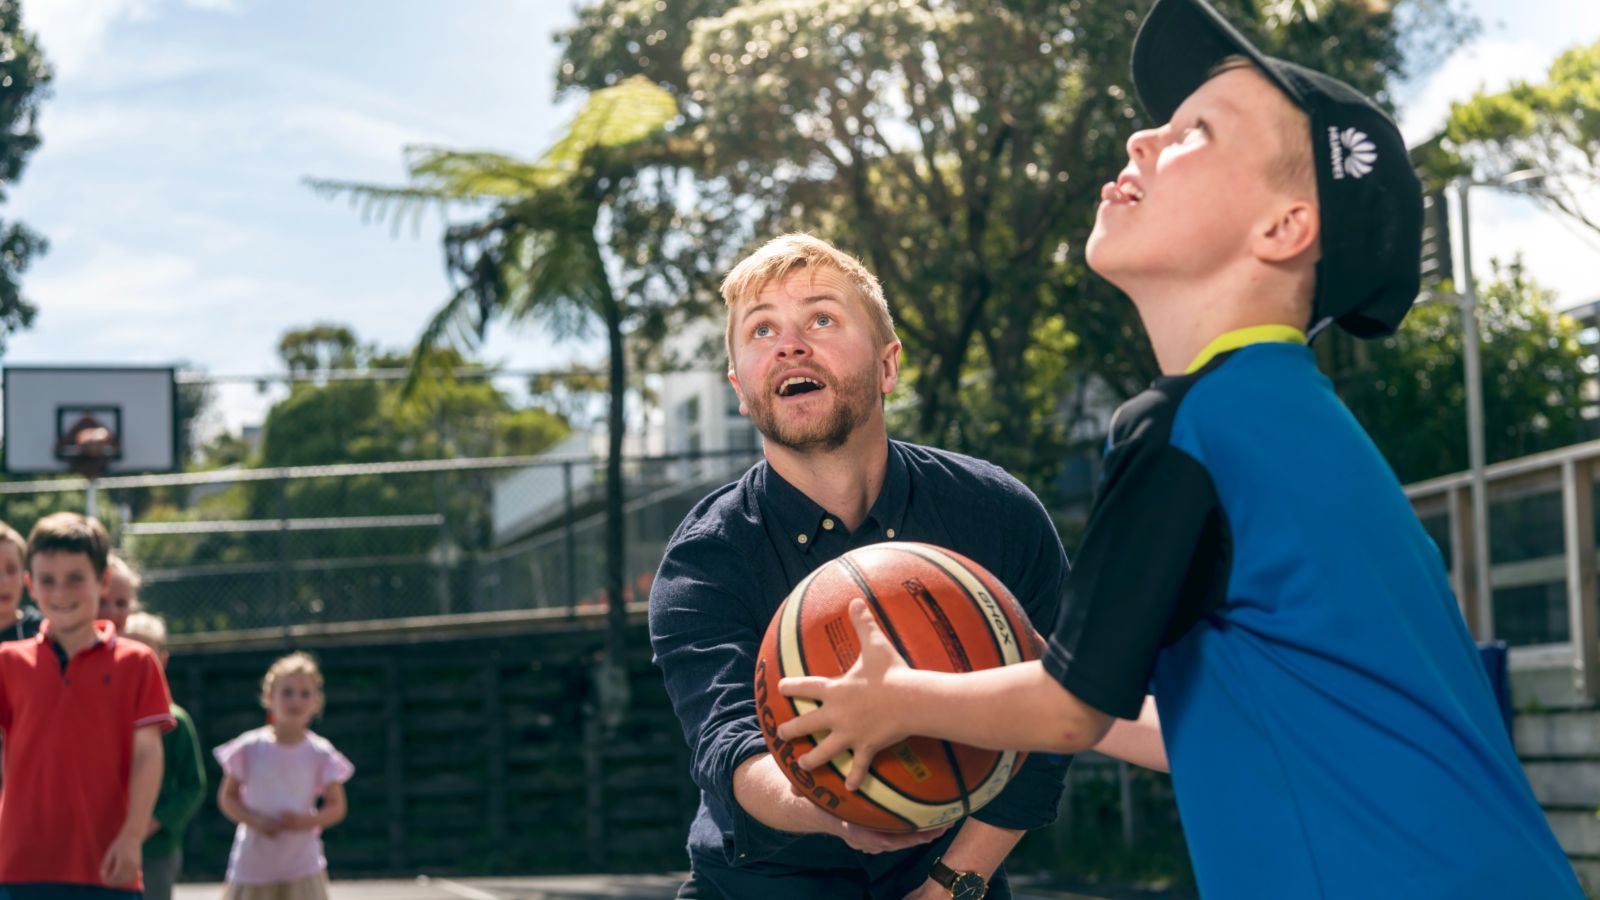 Male primary teacher teaching a boy in a blue shirt how to shoot a basketball